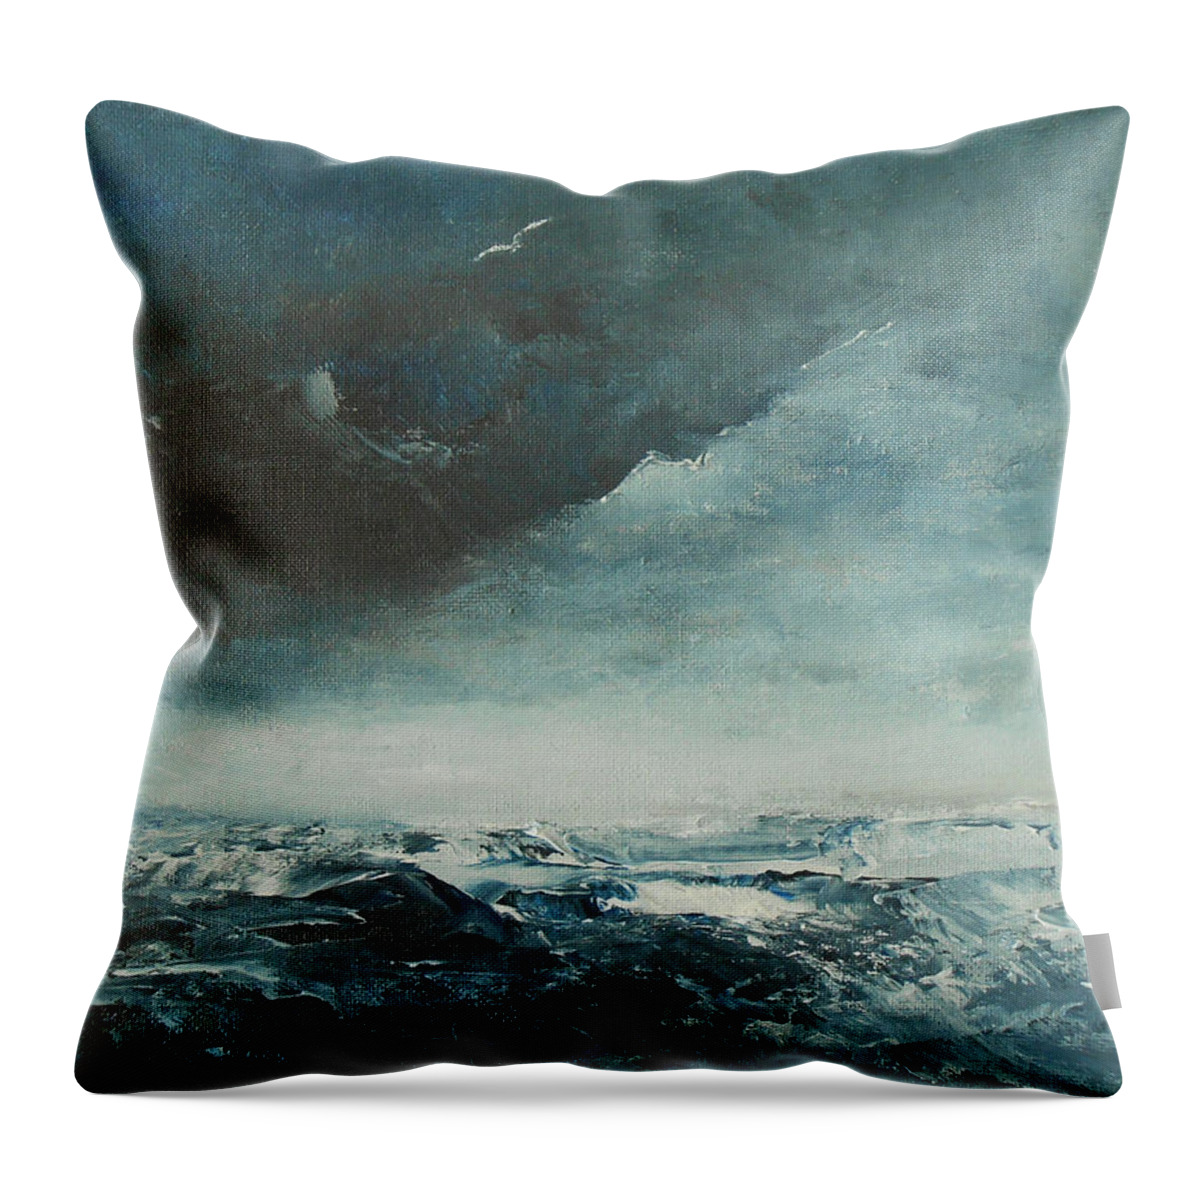 Abstract Throw Pillow featuring the painting Peace In The Midst Of The Storm by Jane See